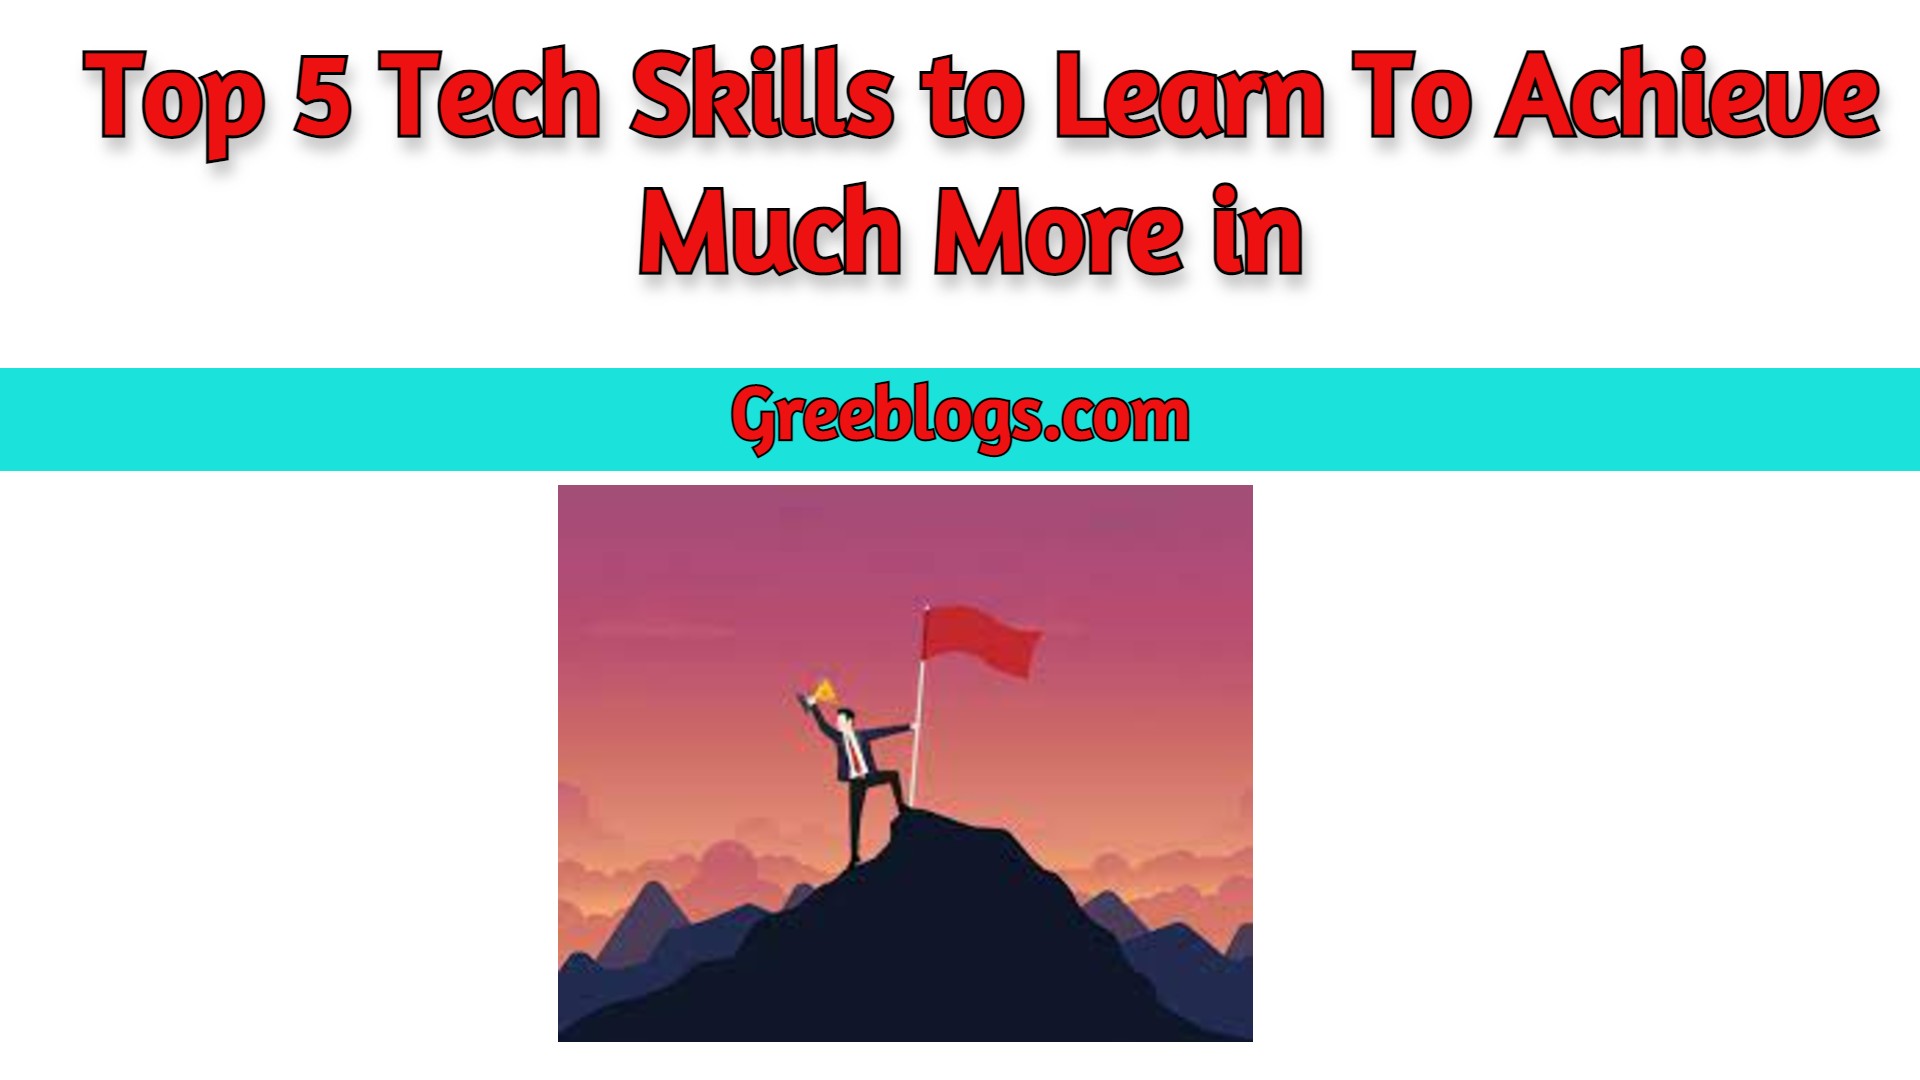 Top 5 Tech Skills to Learn To Achieve Much More in 2021